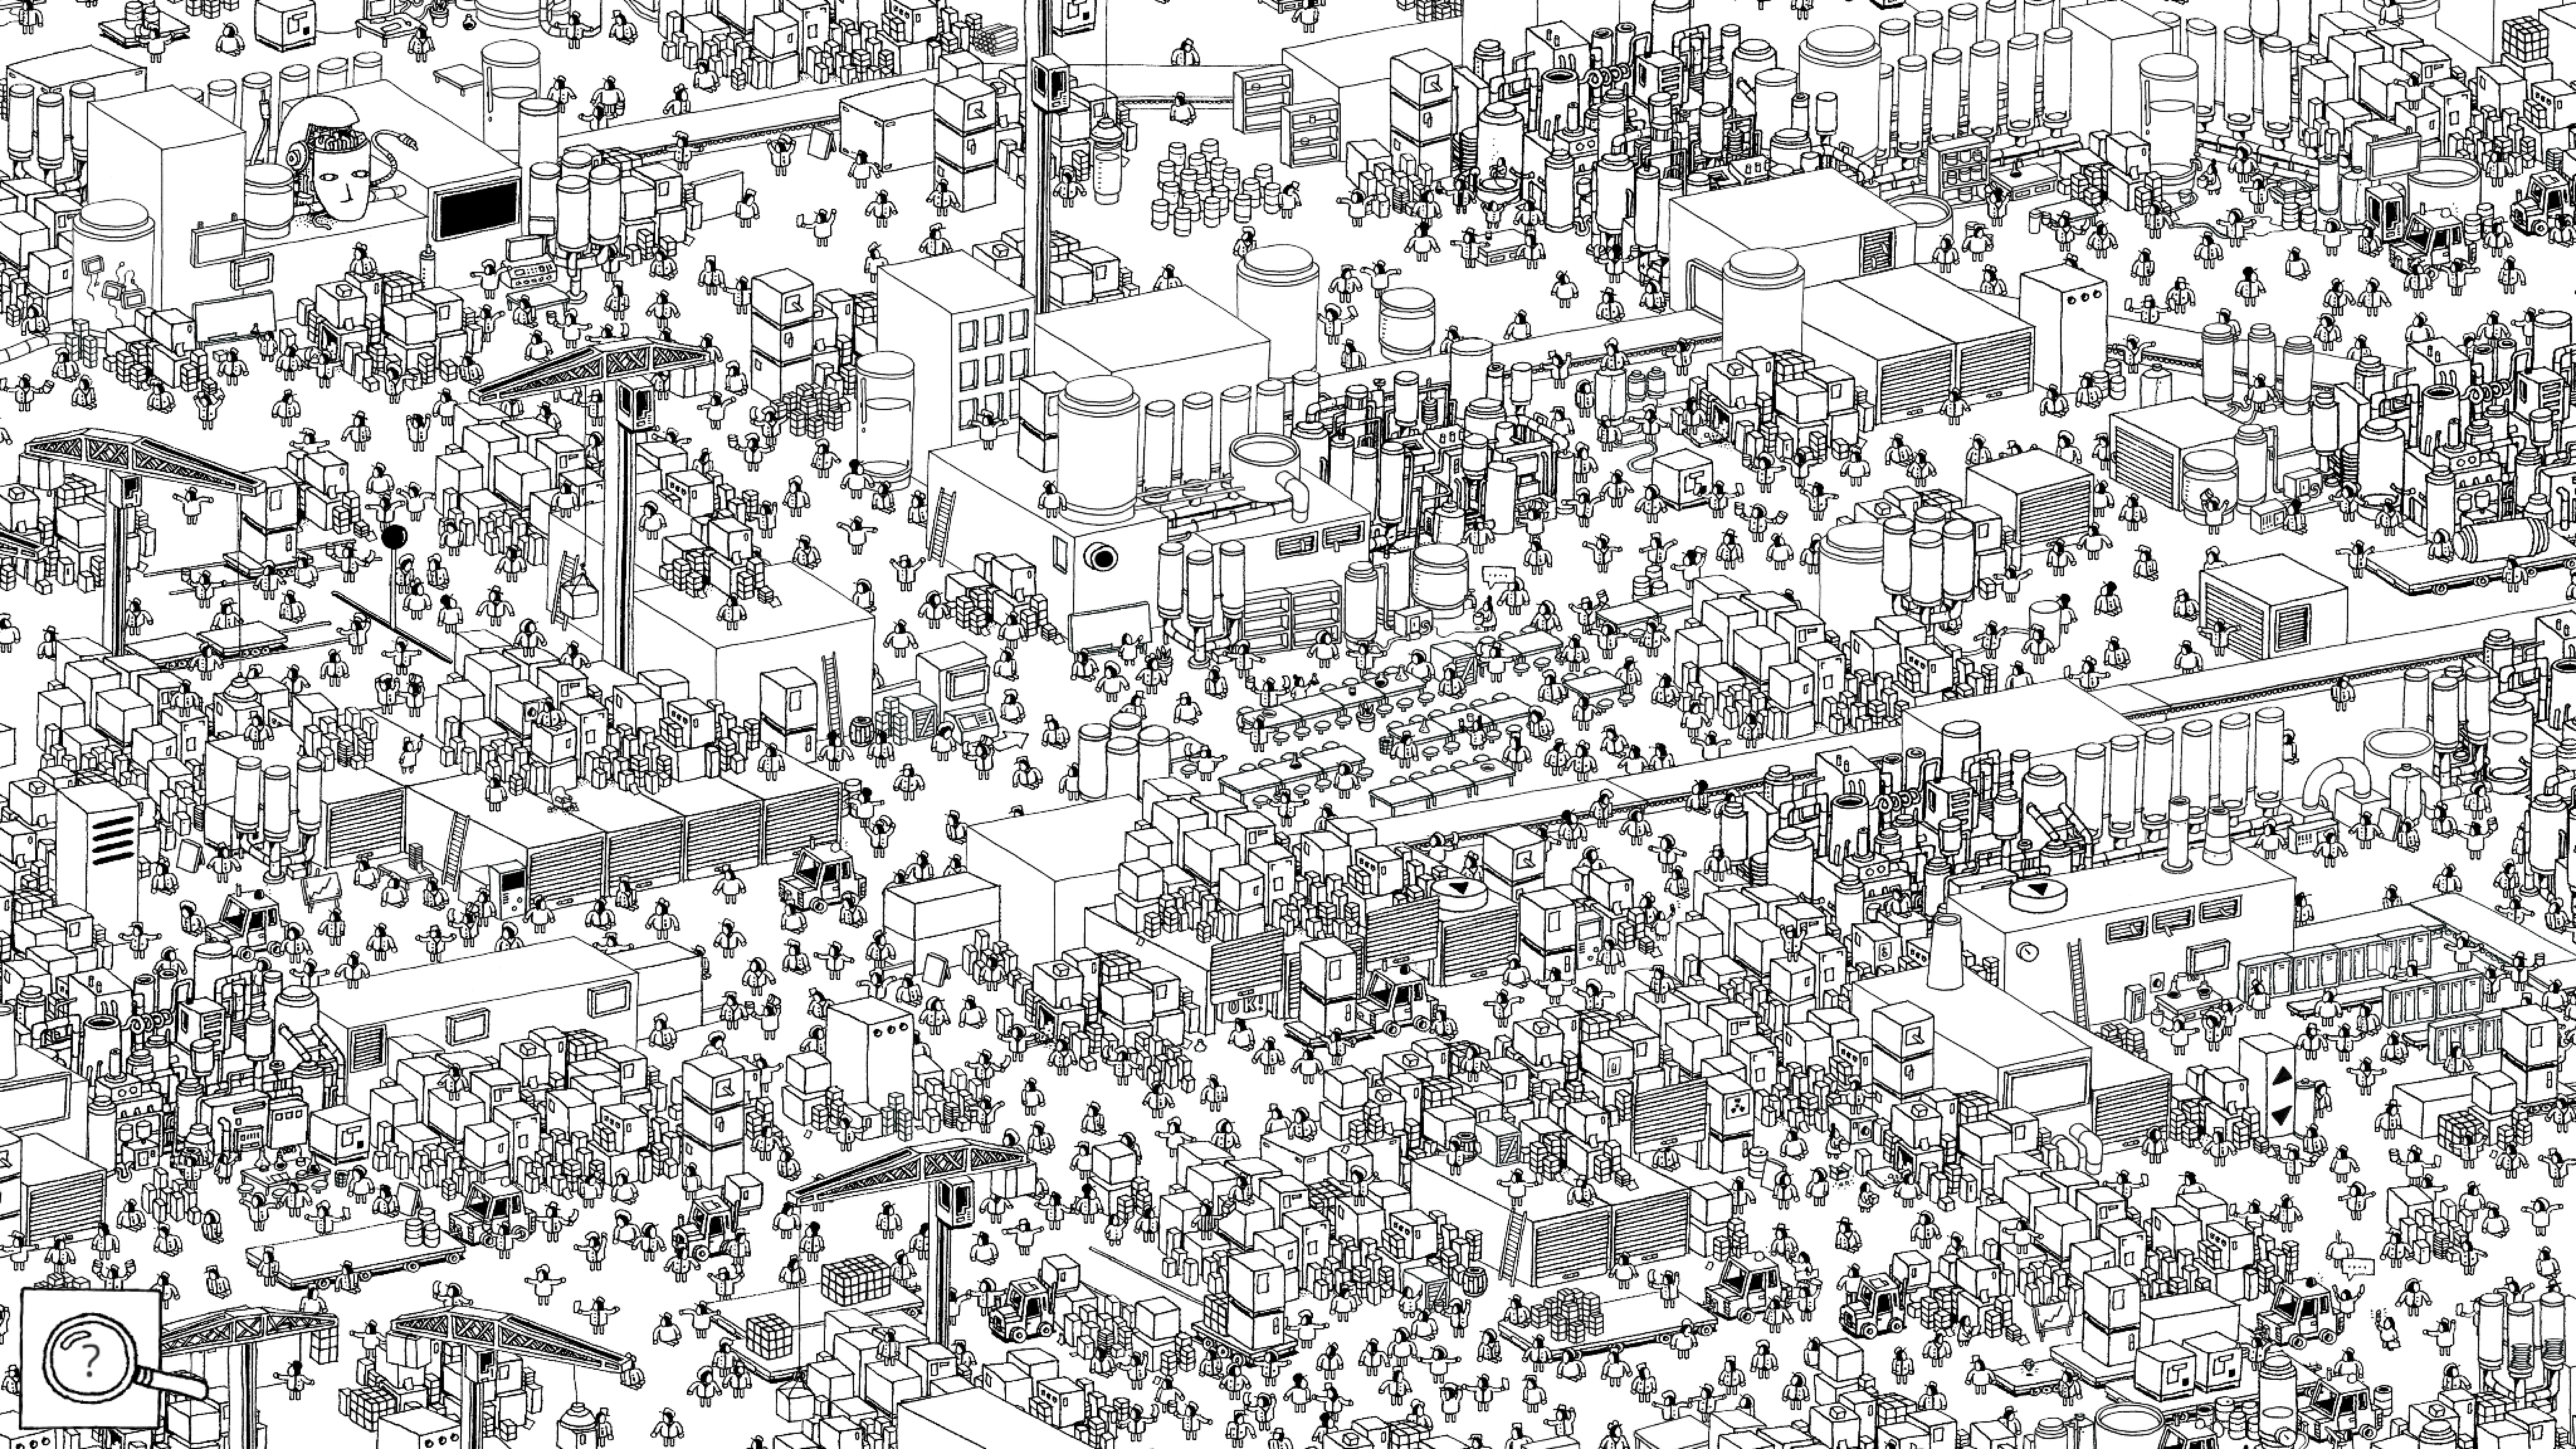 If you love adult coloring books, you'll enjoy 'Hidden Folks'